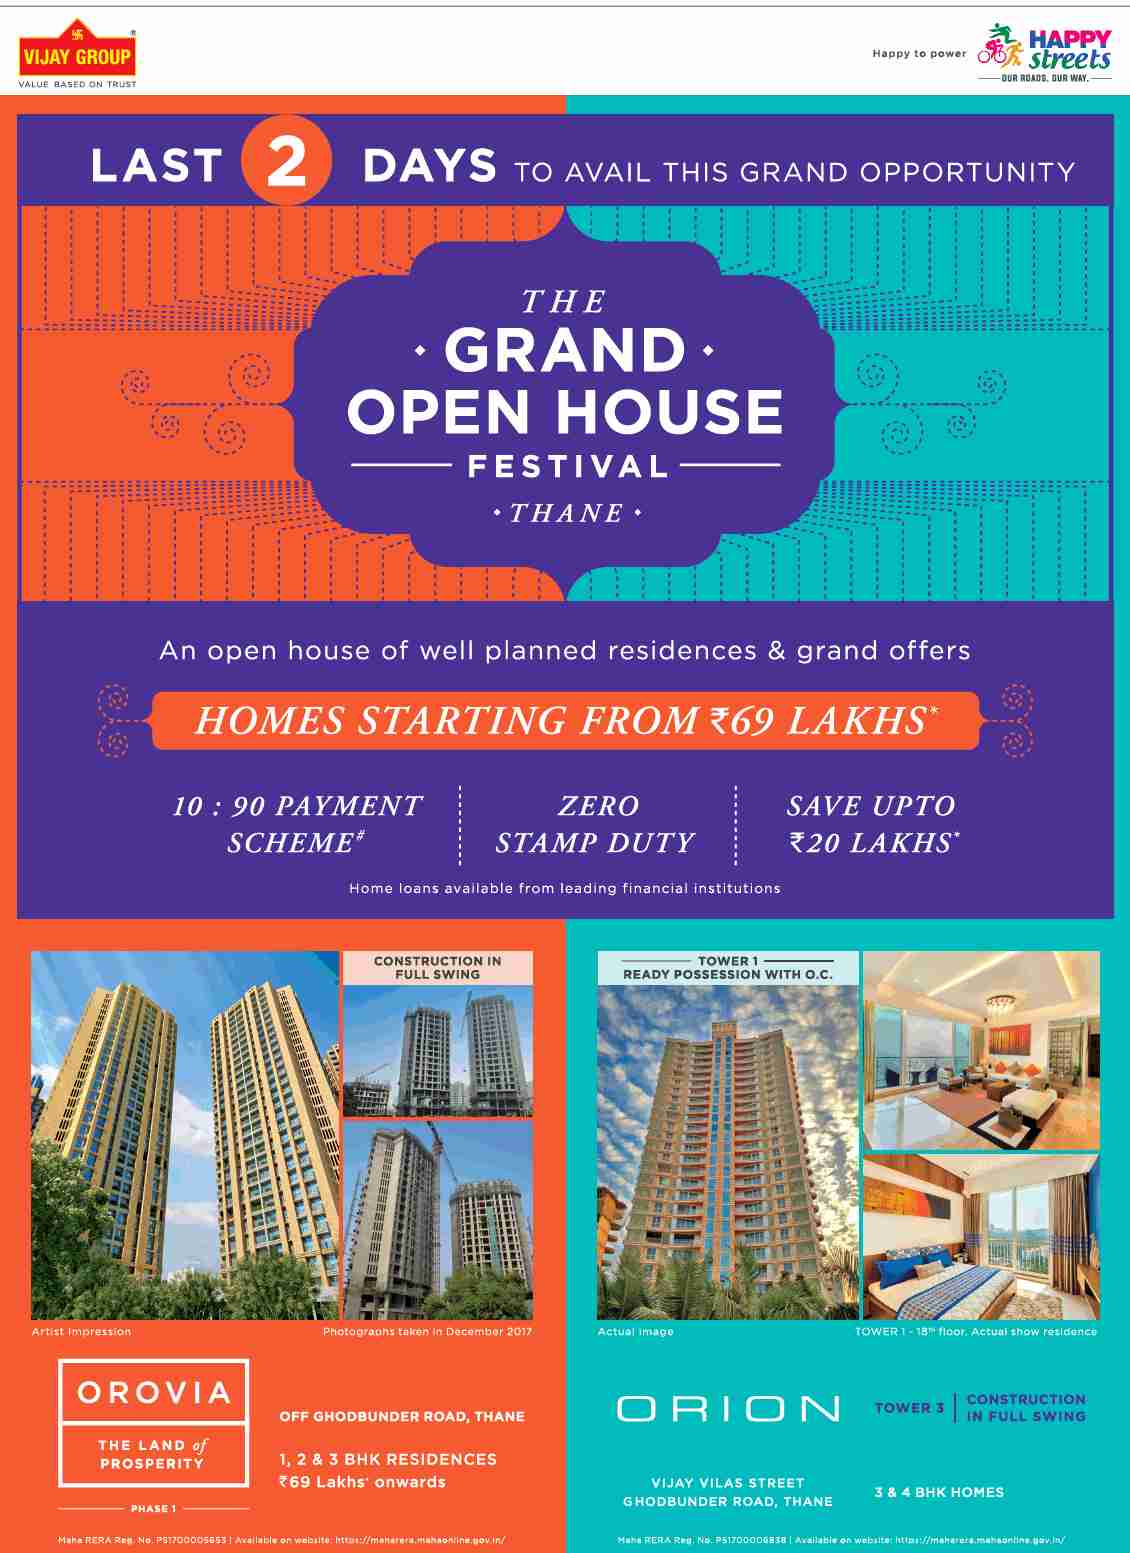 An open house of well-planned residences and grand offers during The grand open house festival in Mumbai Update